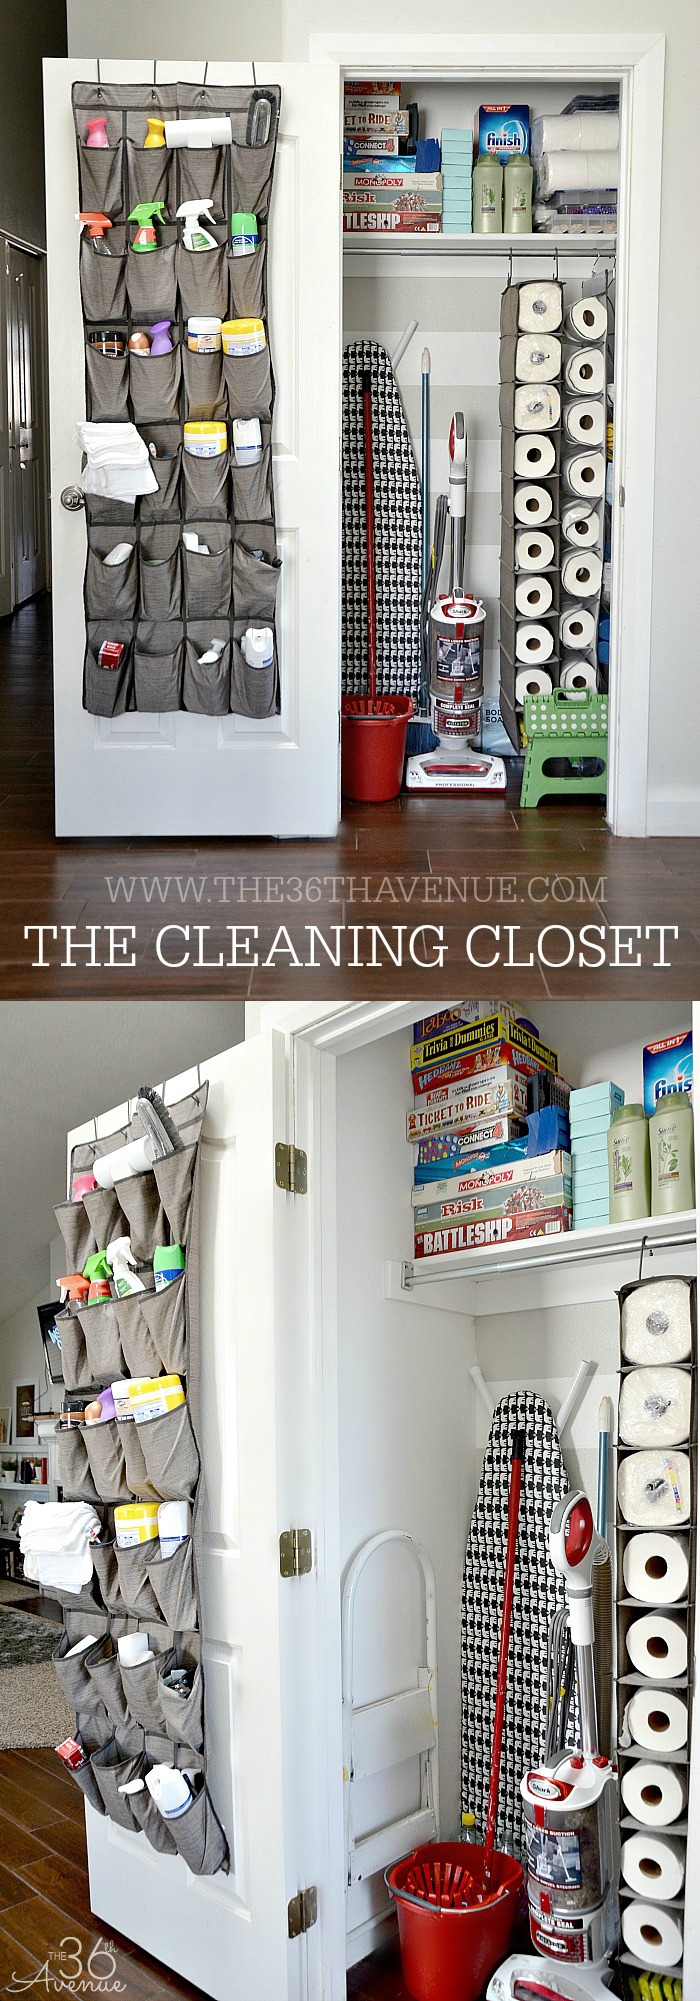 Pin on Home: Closets - Storage